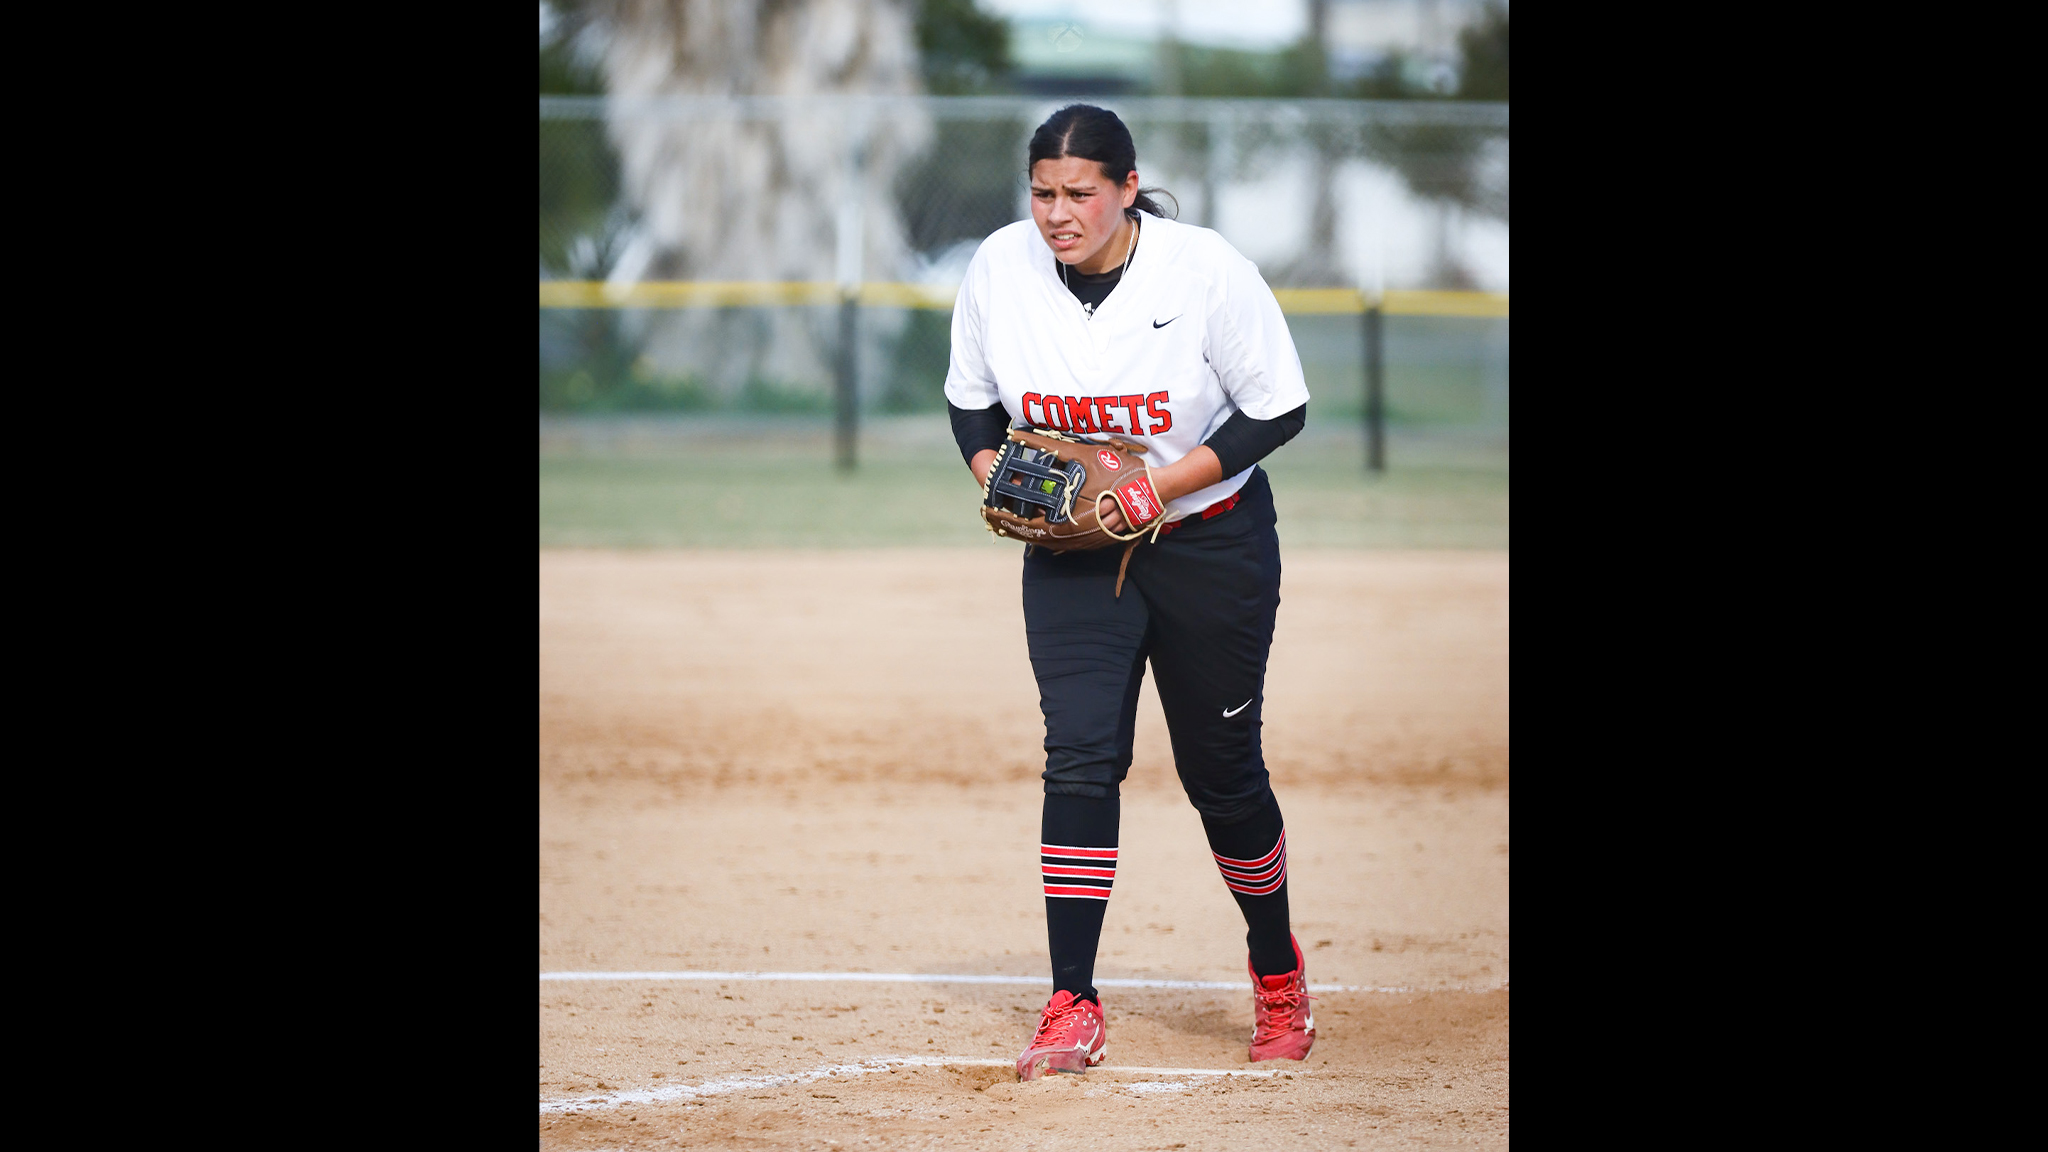 GiGi Clavel had a career-high 13 strikeouts against Riverside City College. Photo by Cara Heise.